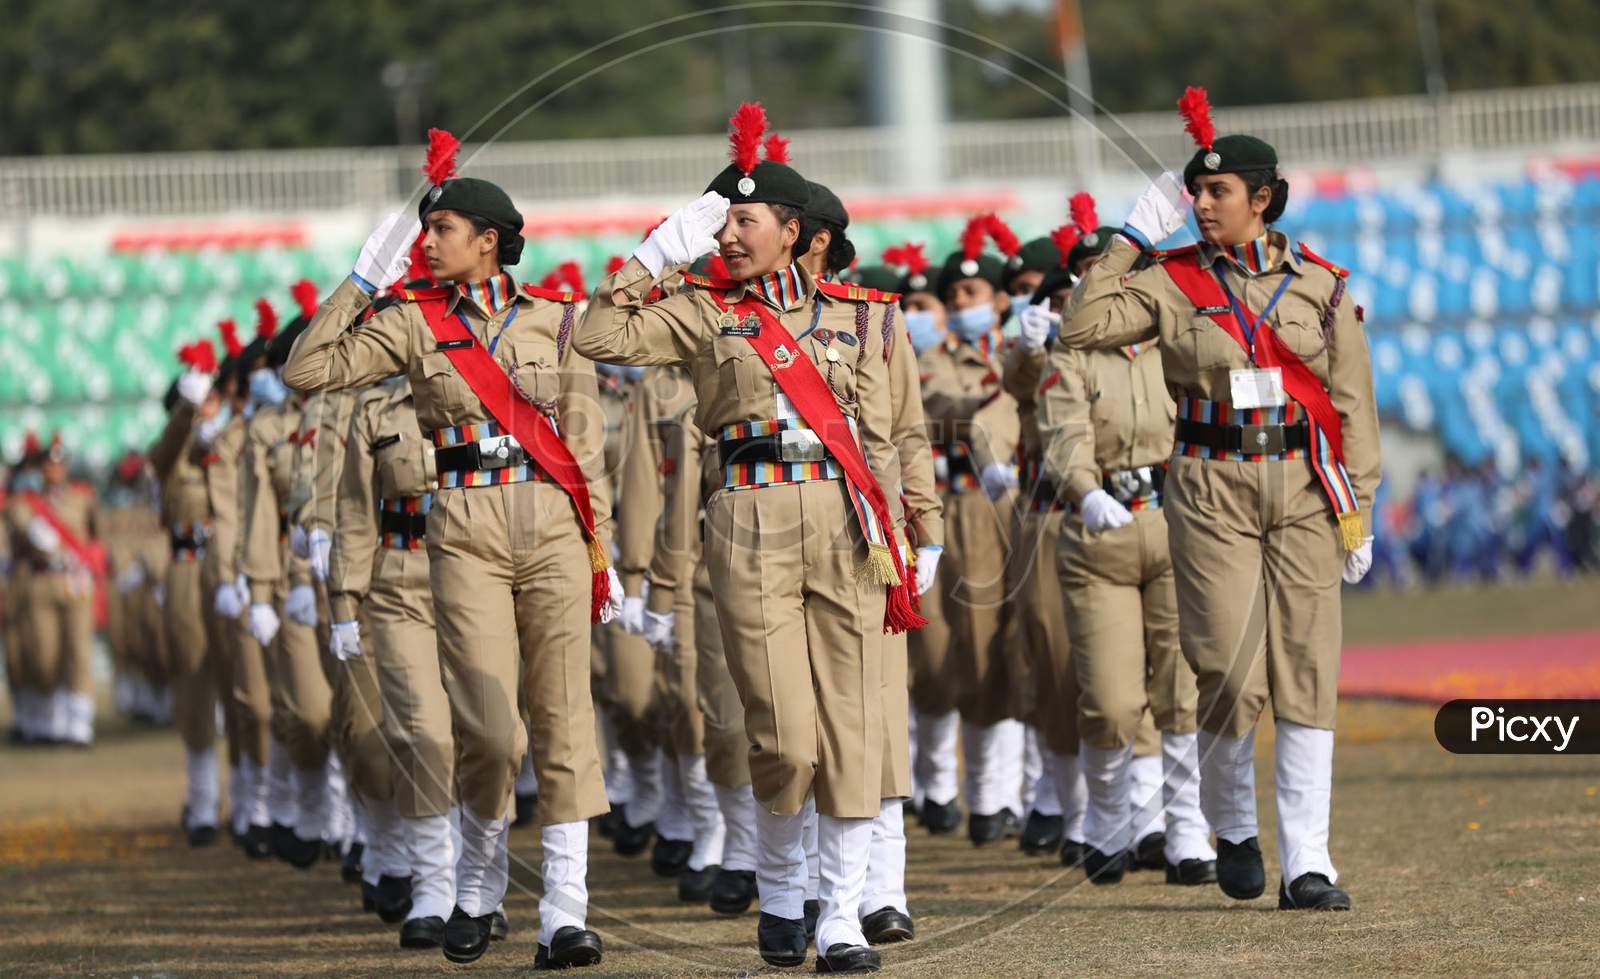 NCC contingent during the full dress rehearsals for the Republic Day parade at Molana Azad Stadium in Jammu on Sunday.24 Jan,2021.